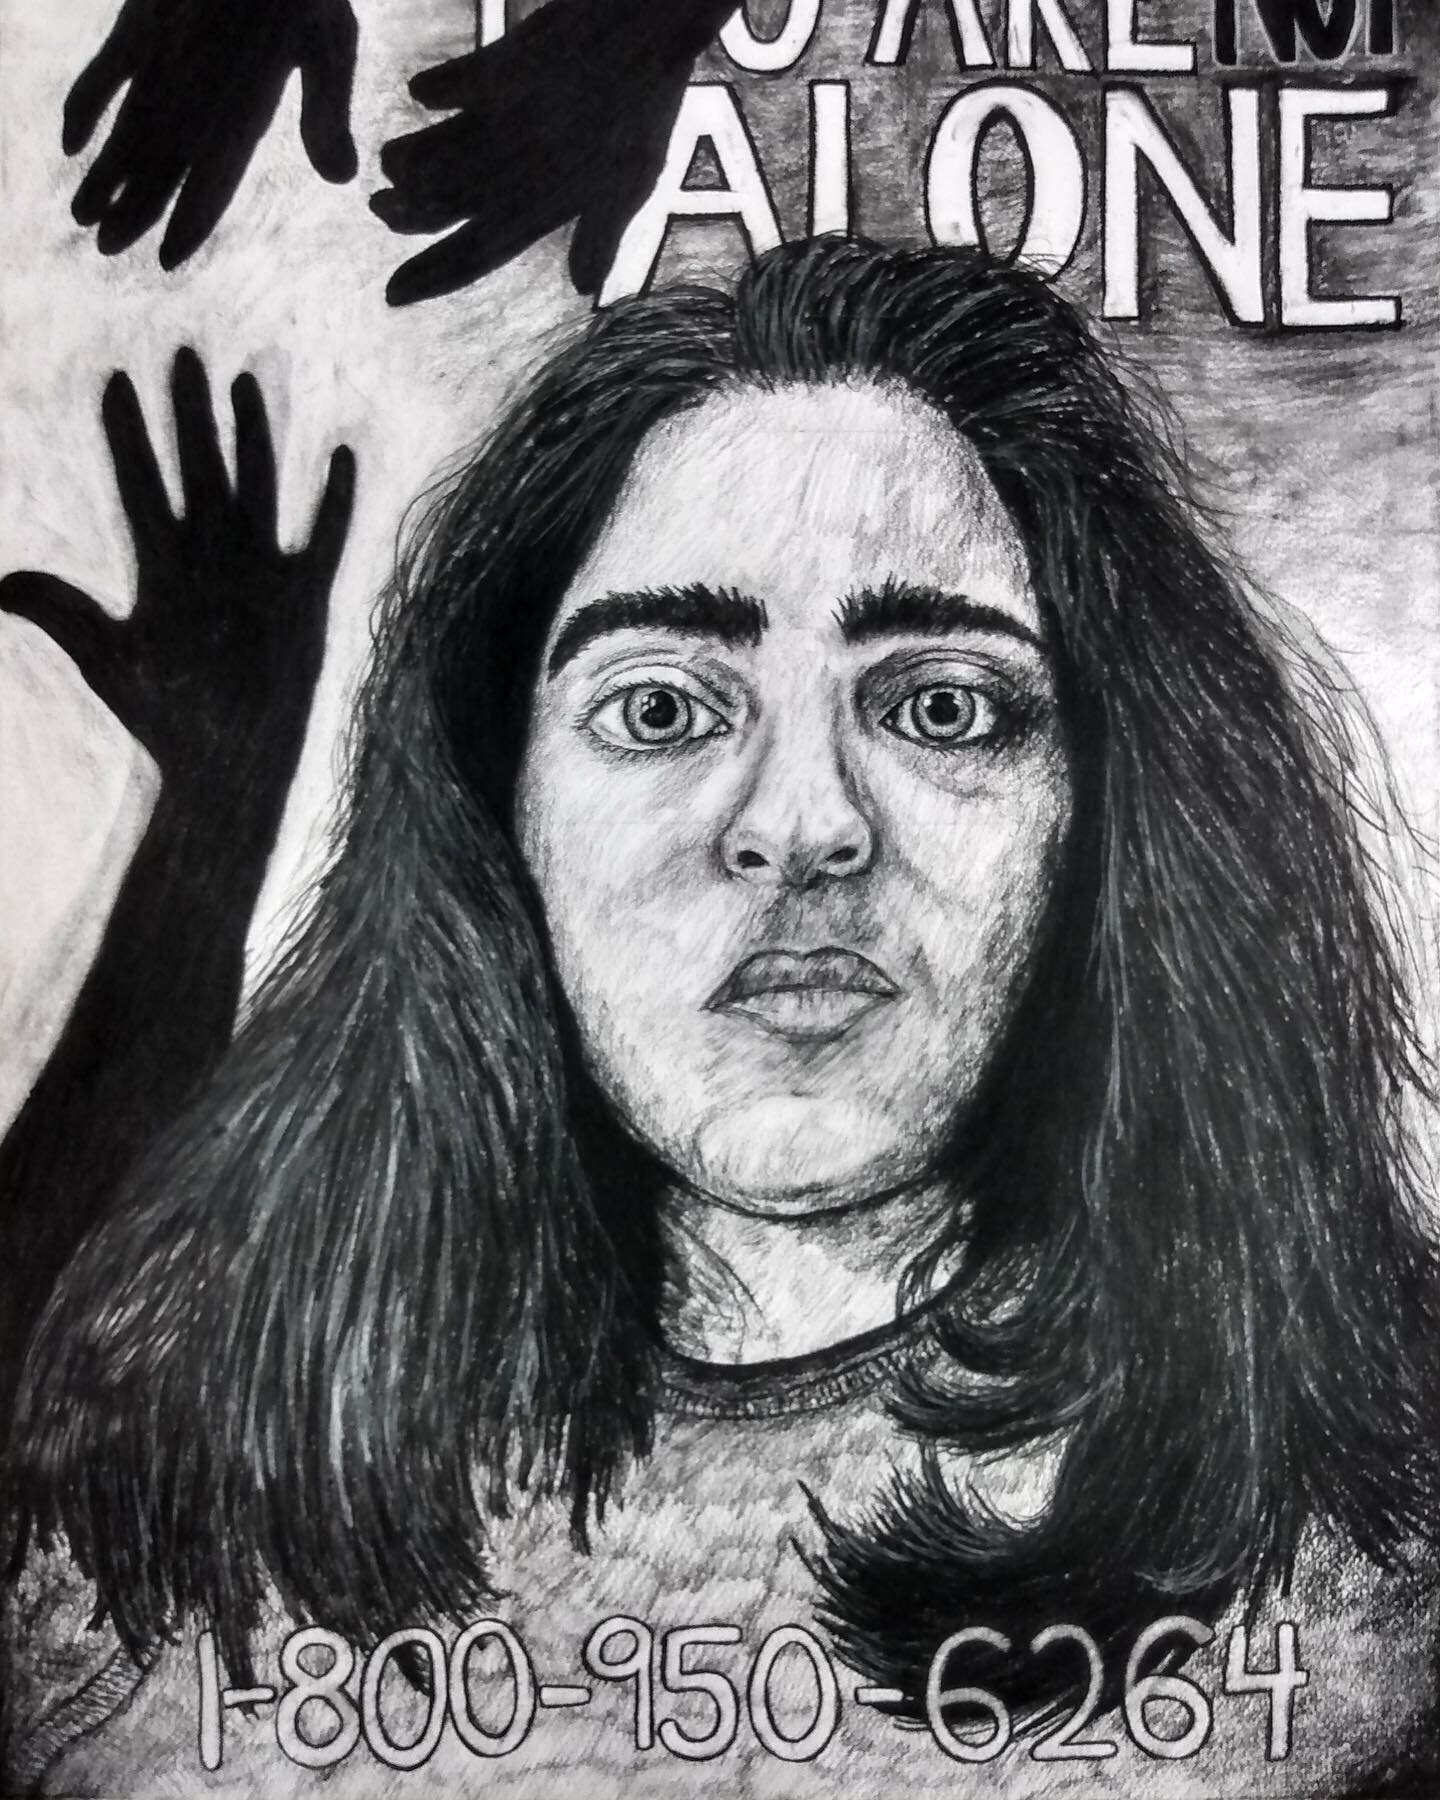 You Are NOT Alone 1 800 950 6264 / self portrait by student @emily.suthar 
Charcoals on Rives bfk 22&rdquo;x30&rdquo; 
#bigpicture 💪🖤🤍 #bigselfie
.
.
#artclass #drawingclass #selfportrait #artmajor #mentalhealthawareness #helpisoutthere #mentalhea